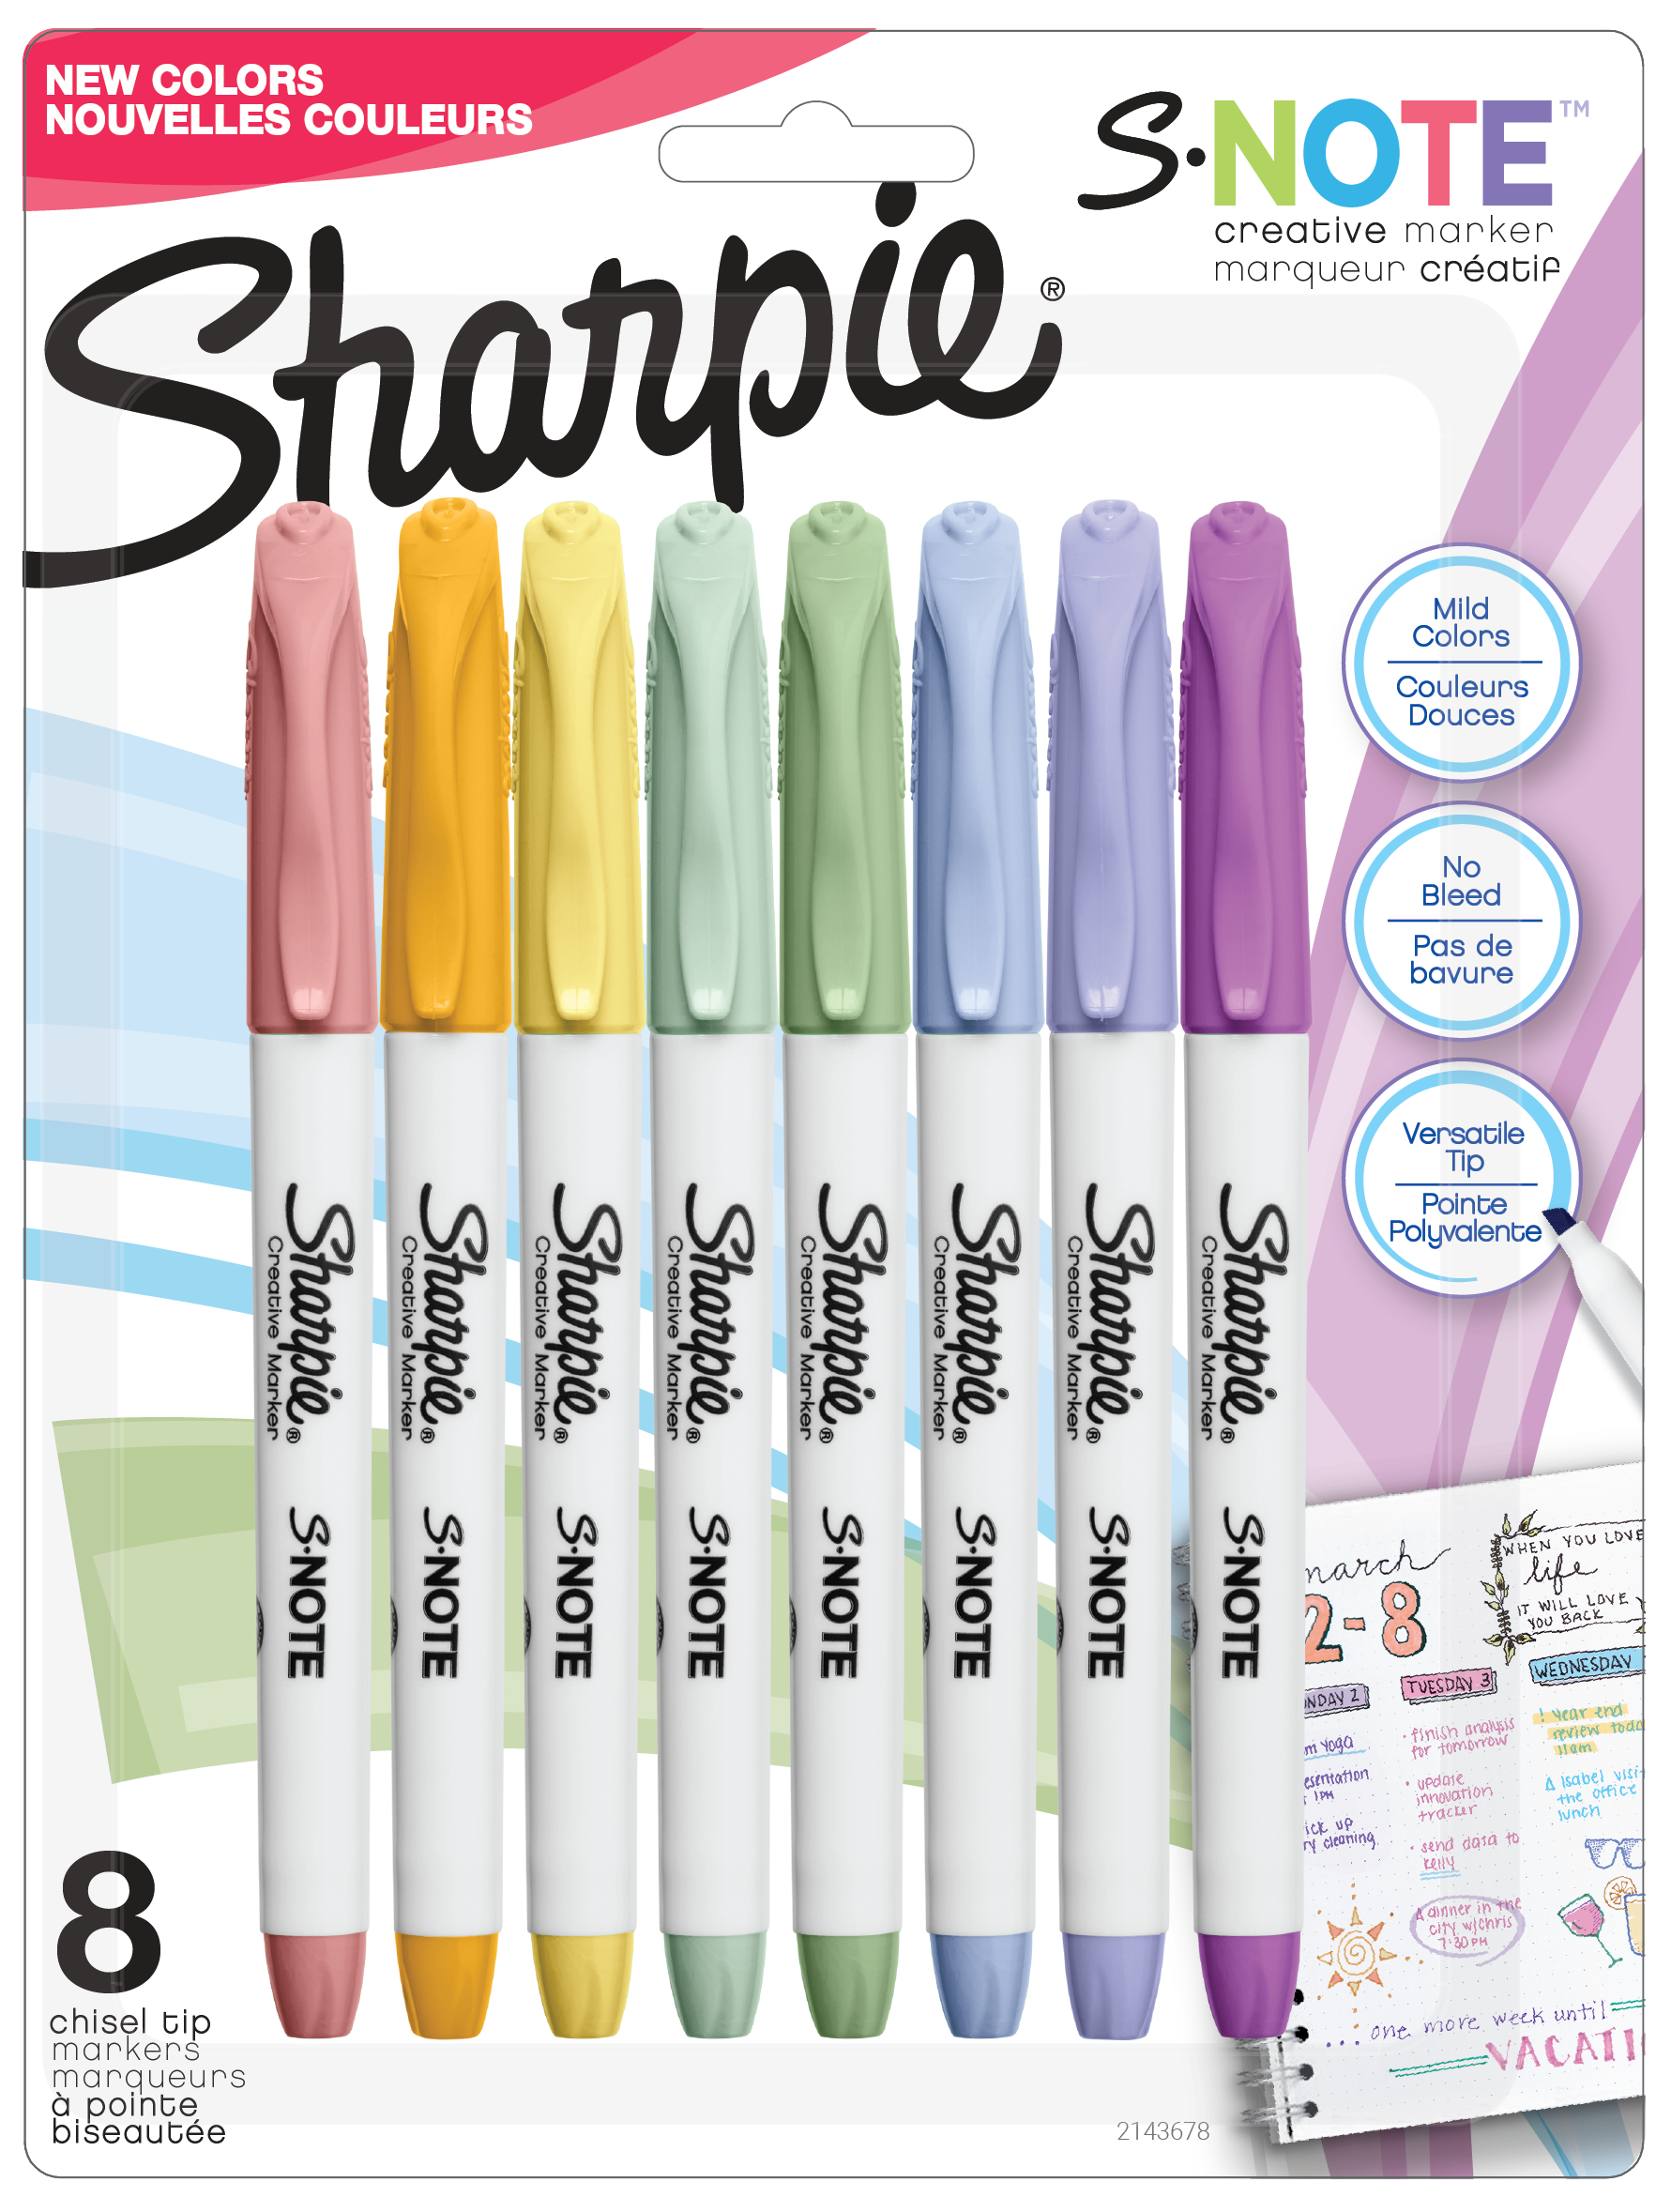 Sharpie S-Note Creative Markers, Highlighters, Assorted Colors, Chisel Tip, 8 Count - image 1 of 9